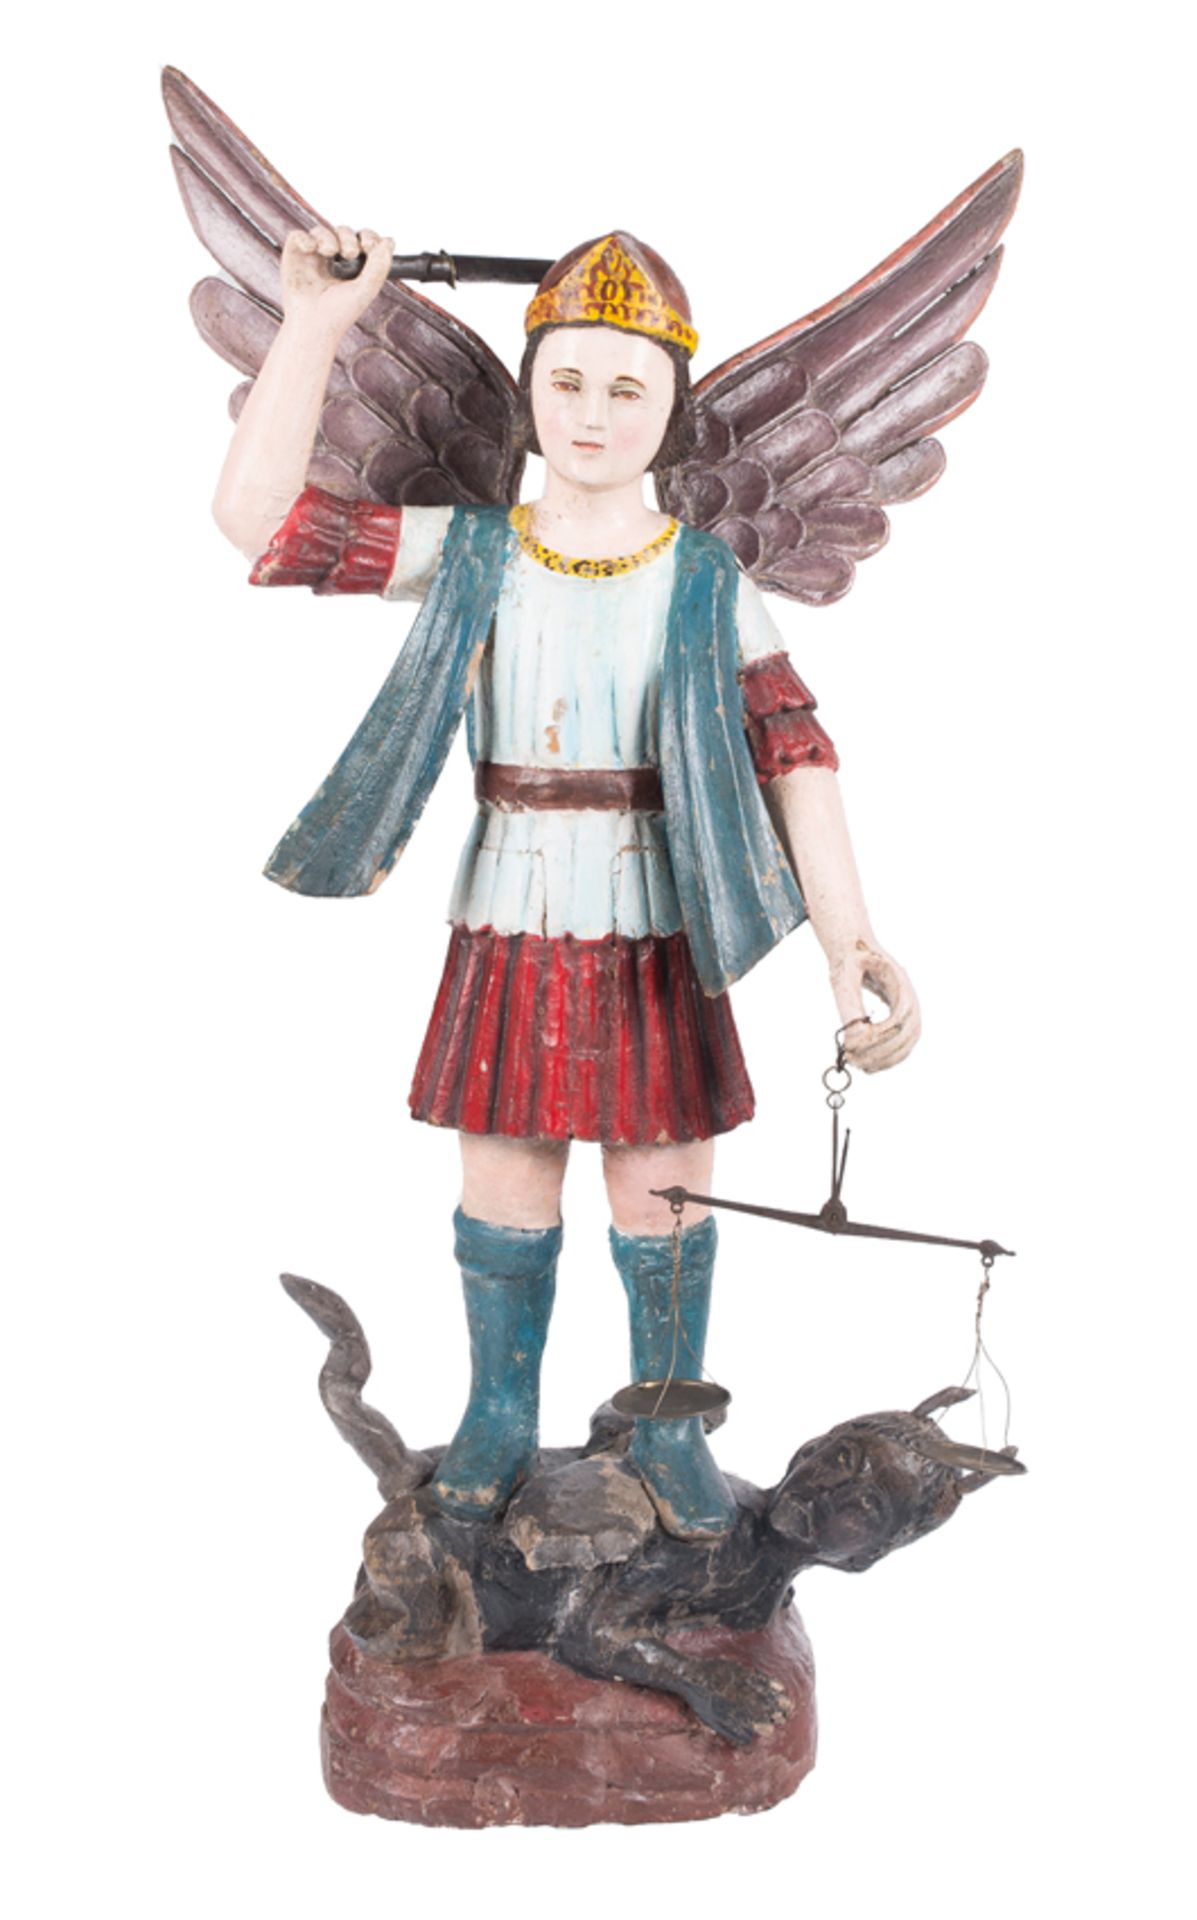 "Angel". Carved and polychromed wooden sculpture. Guarani School. Paraguay. 18th century.